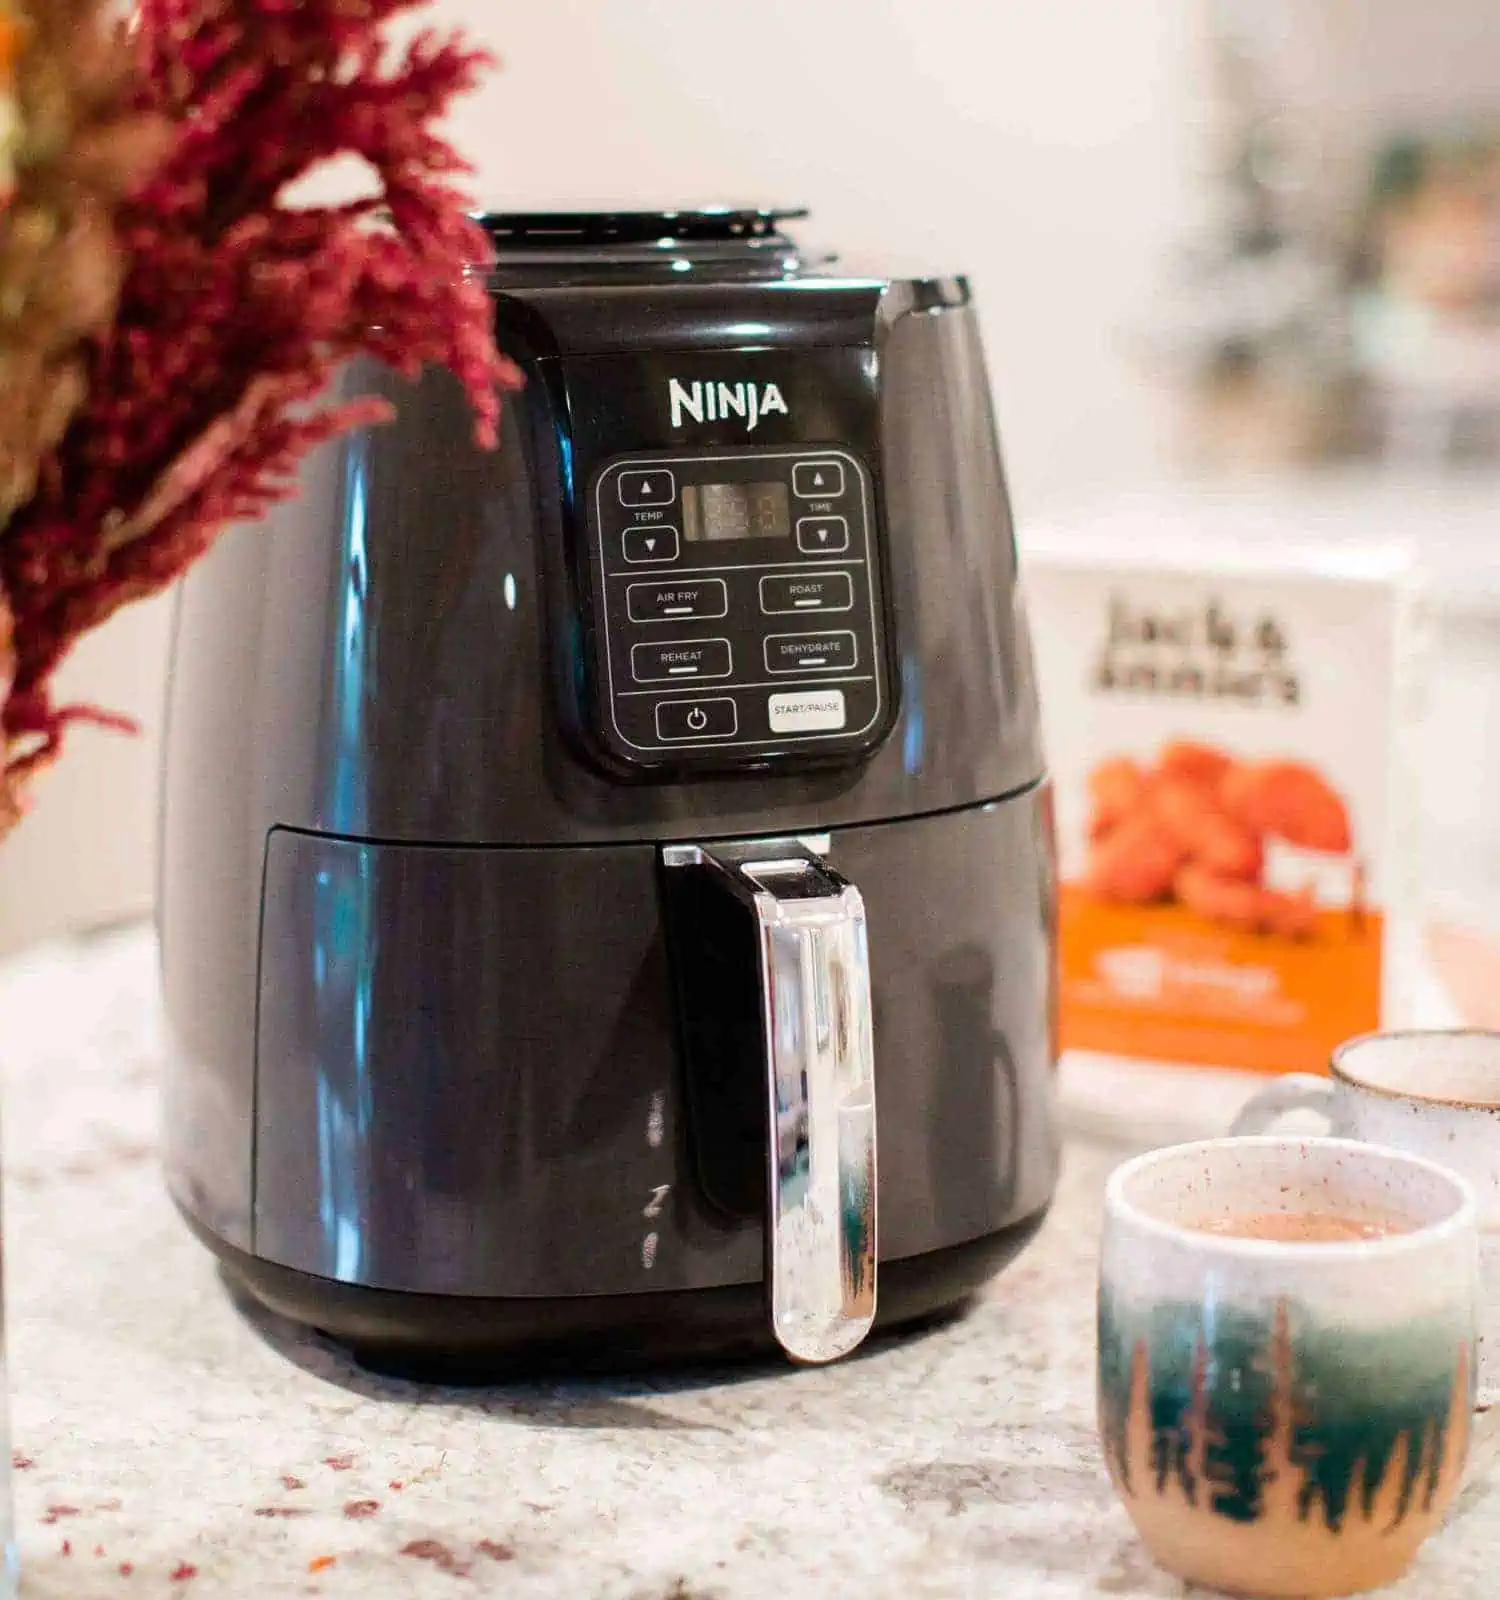 ninja air fryer with jack and annies vegan nuggets staged on world of vegan countertop